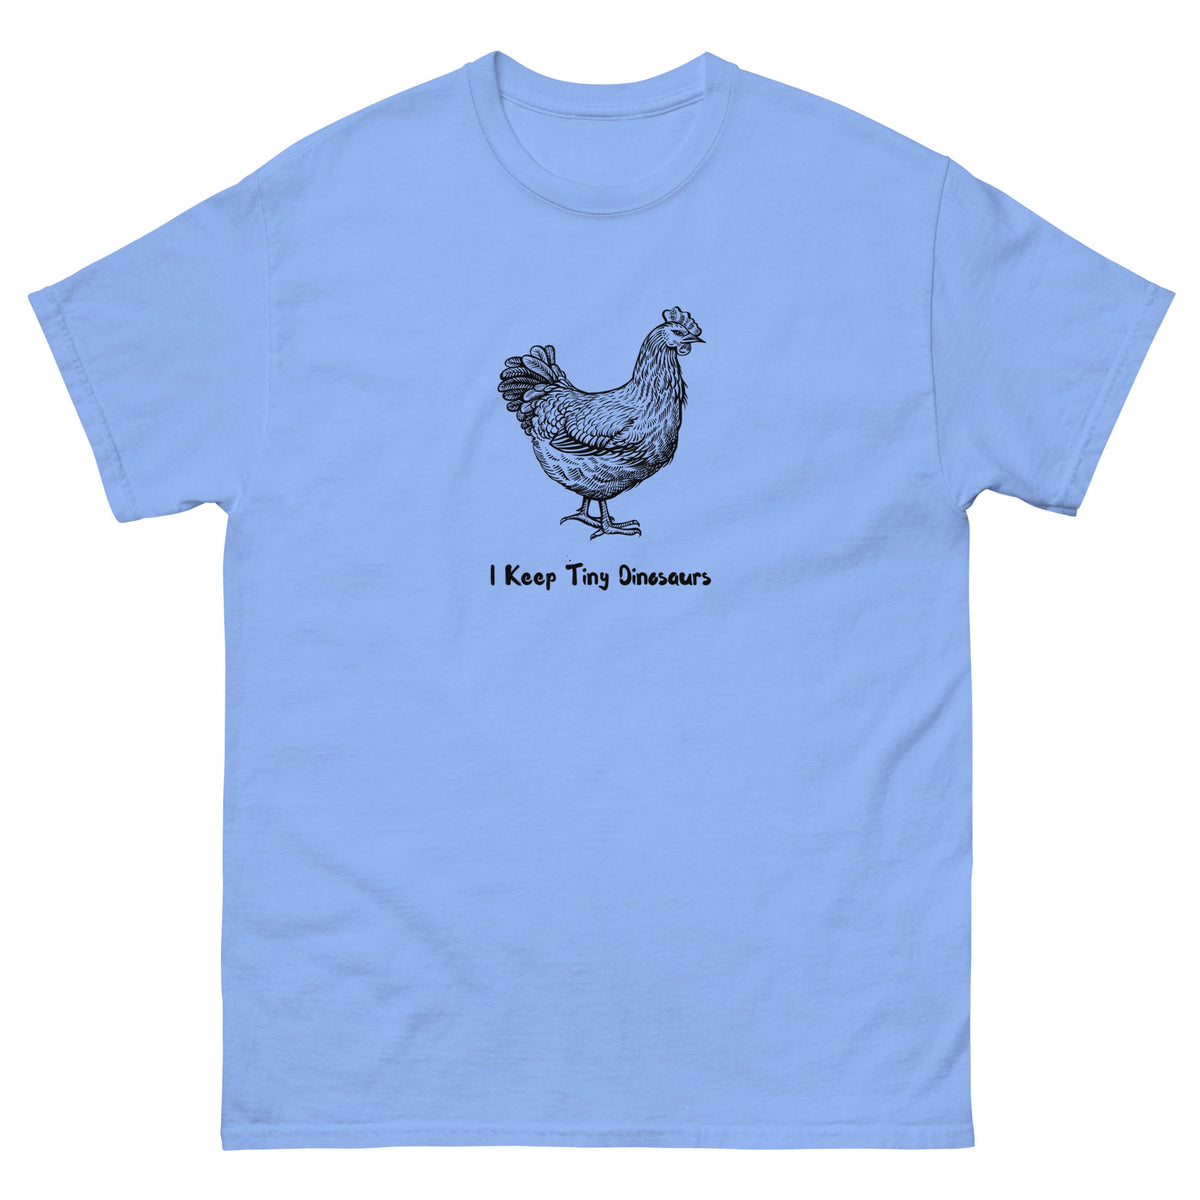 Tiny Dinosaurs Unisex Classic Tee - Cluck It All Farms